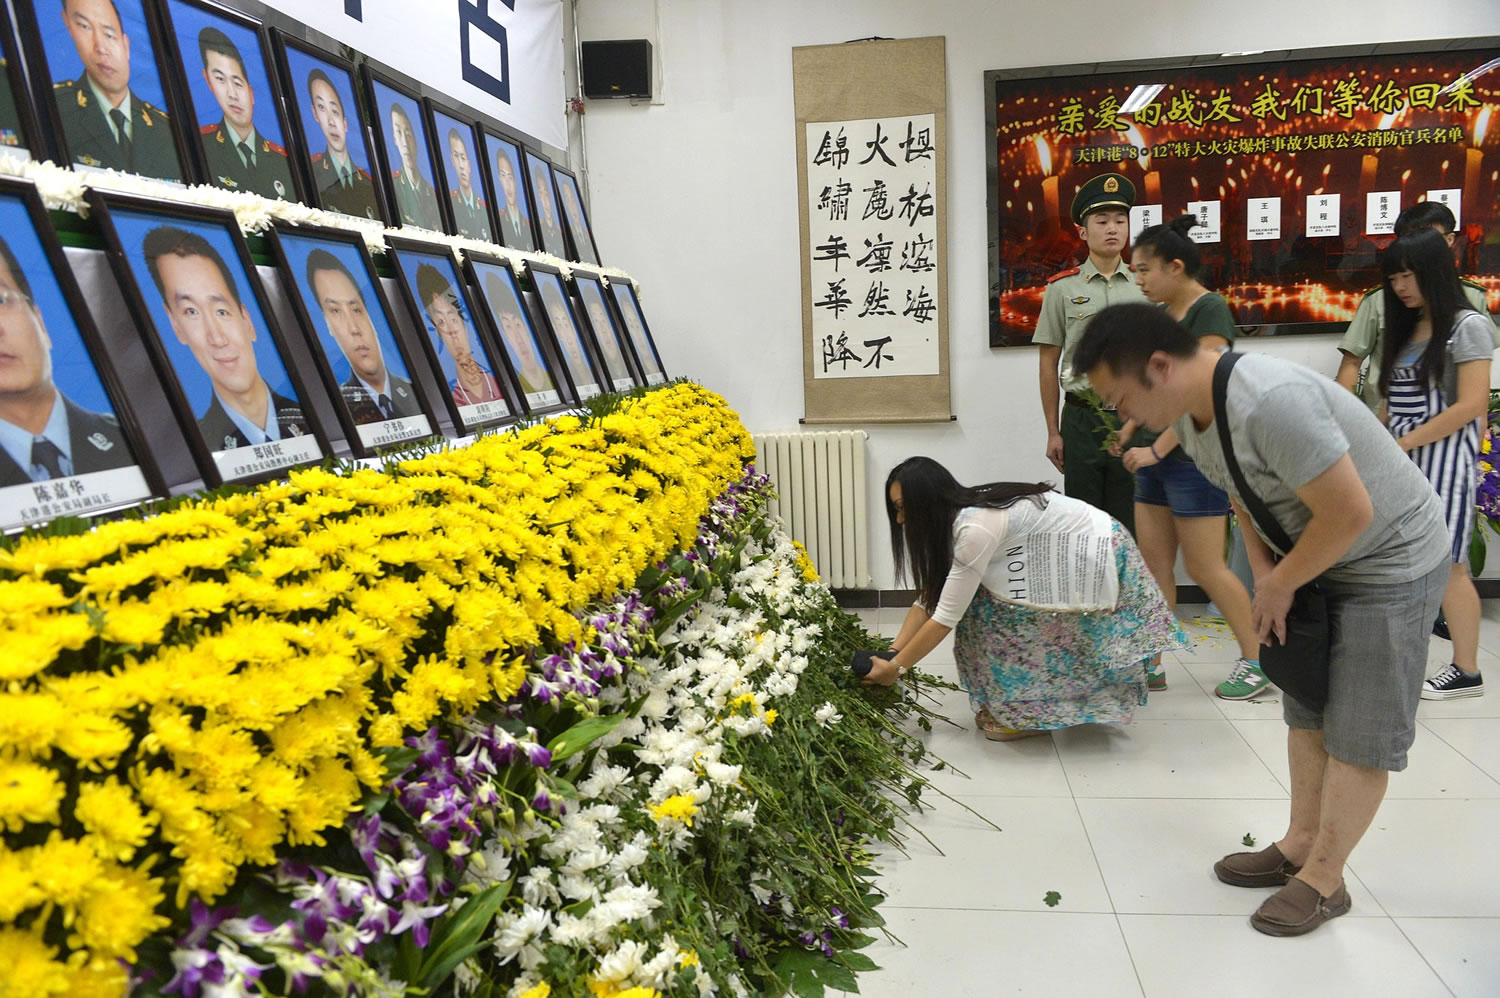 People mourn and place flowers at a memorial at a fire station in northeastern China's Tianjin municipality Tuesday, Aug. 18, 2015, for Chinese firefighters killed in a series of blasts at Tianjin's port. Thunderstorms on Tuesday complicated recovery efforts from last week's massive deadly explosions at a warehouse in Tianjin's port that exposed dangerous chemicals ? including some that could become flammable on contact with water.